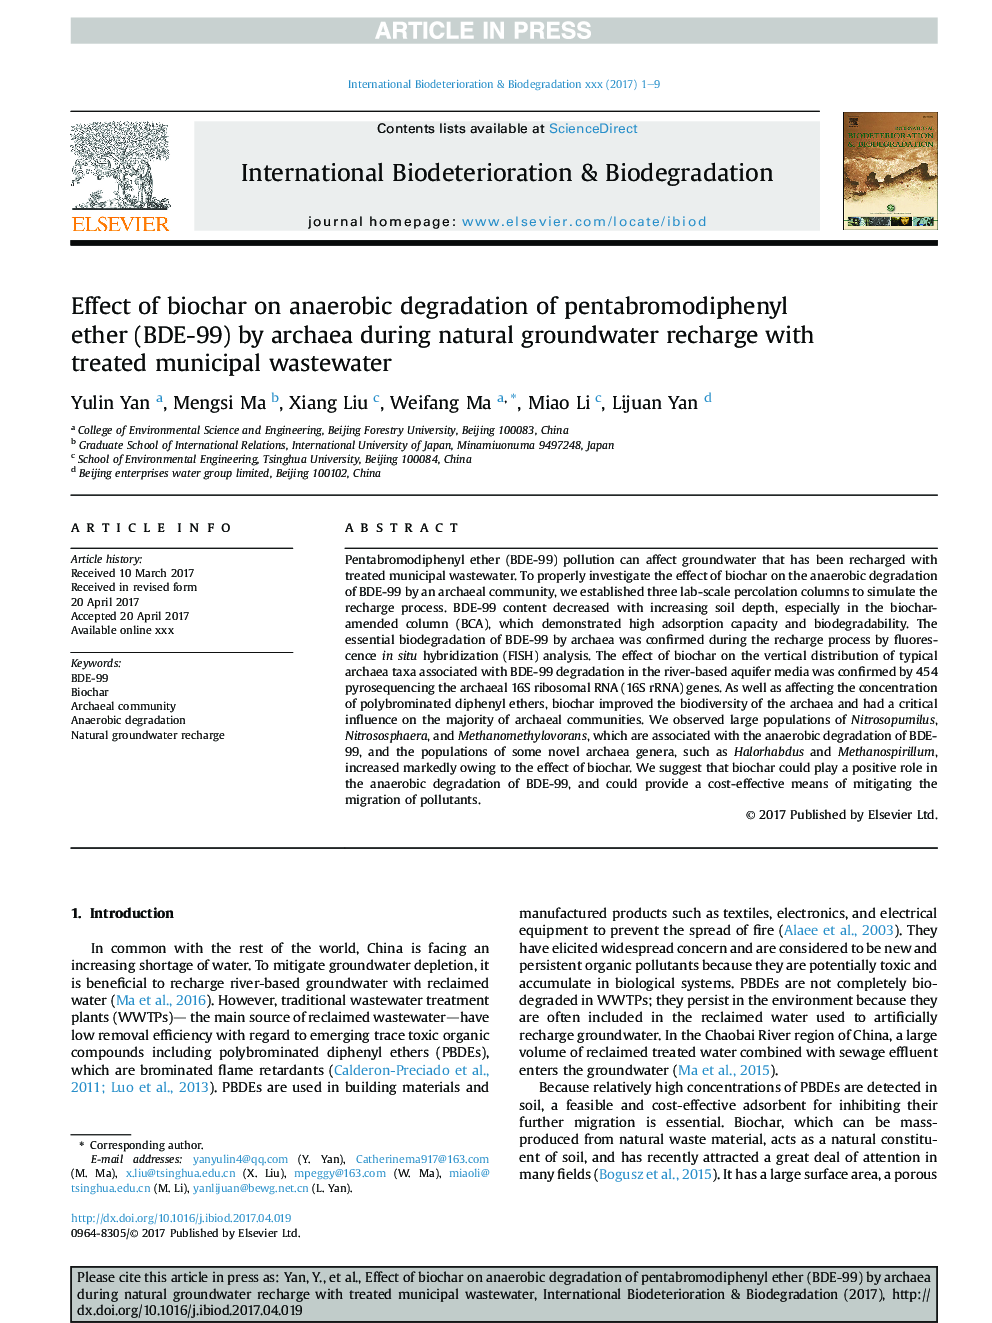 Effect of biochar on anaerobic degradation of pentabromodiphenyl ether (BDE-99) by archaea during natural groundwater recharge with treated municipal wastewater